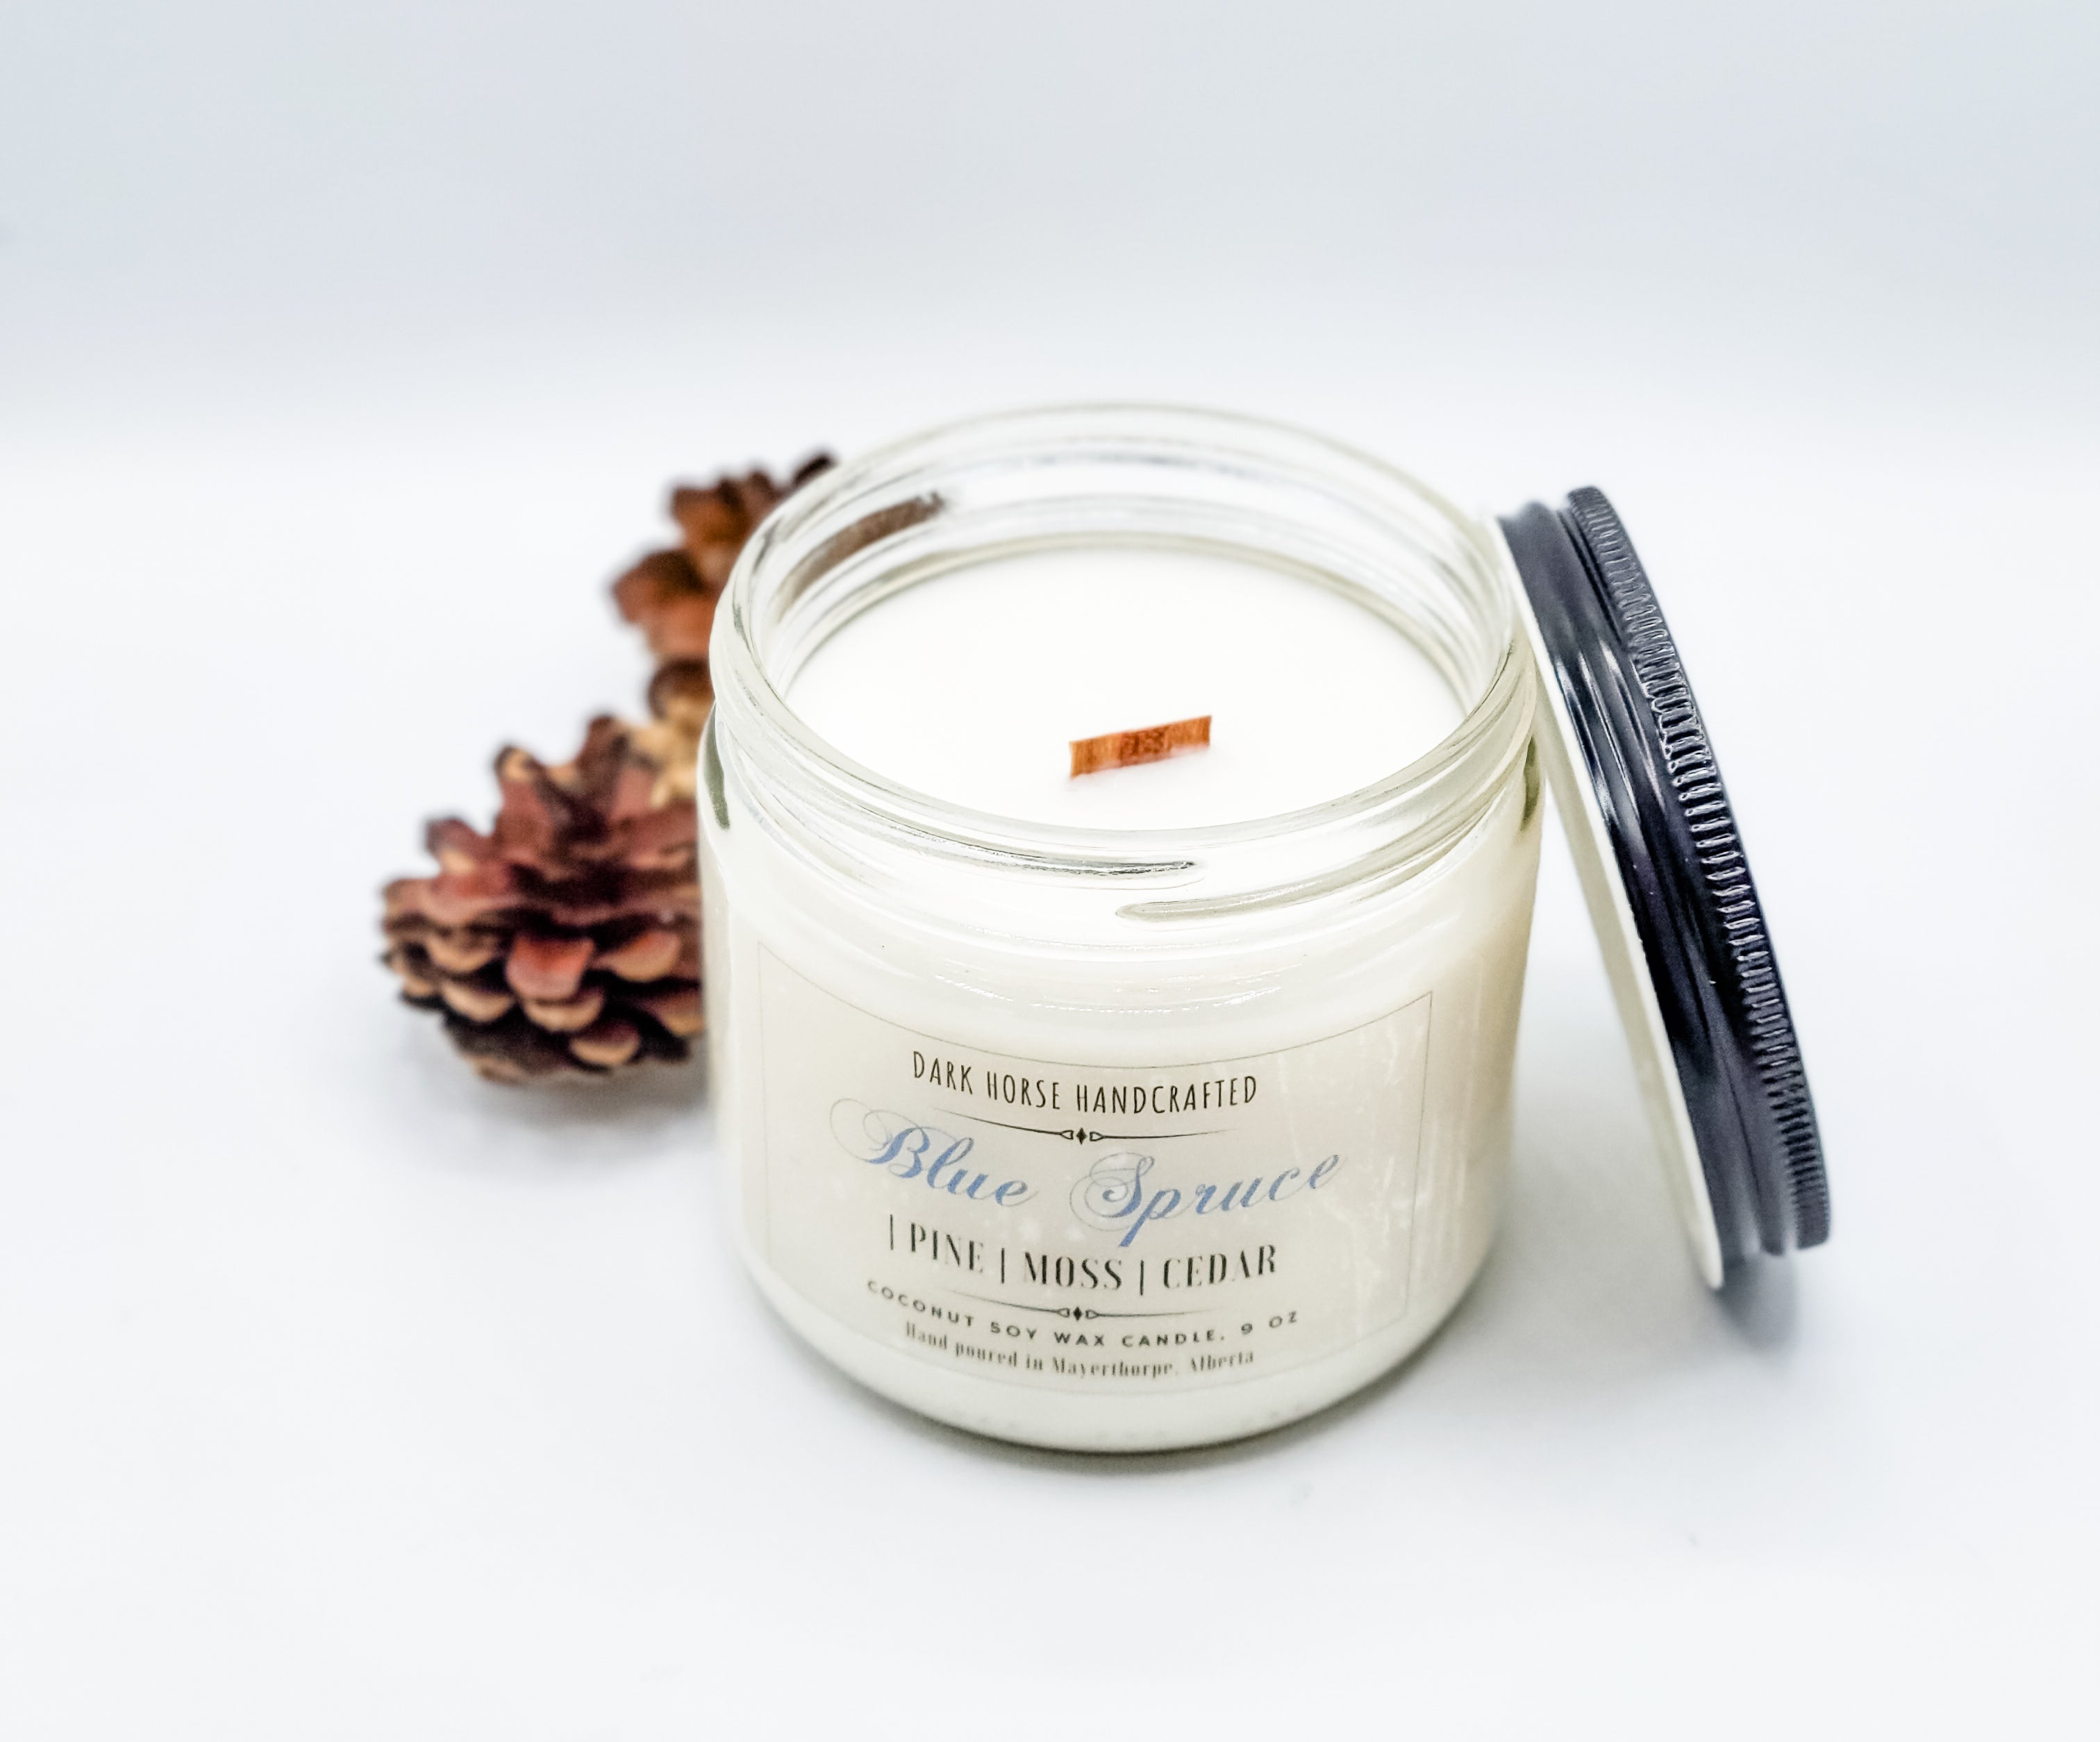 Blue Spruce - Soy Candle